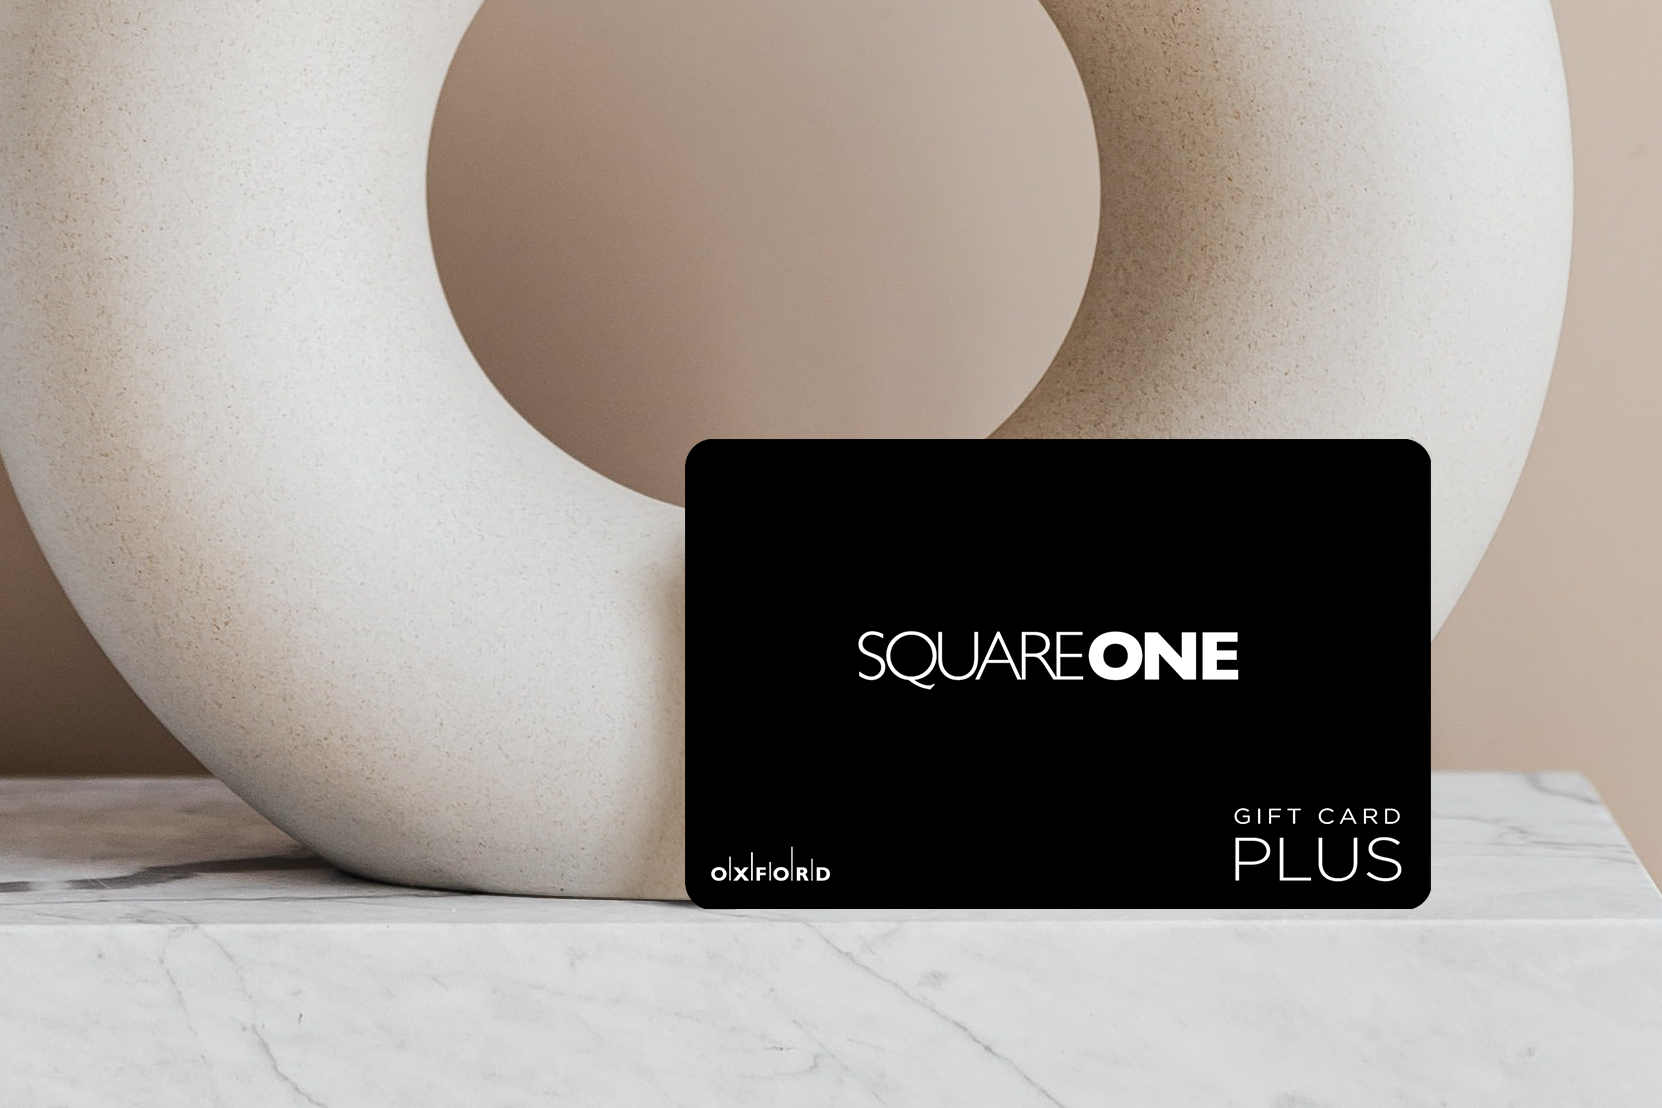 promotional image of a black Square One gift card placed in front of a neutral ceramic circular vase